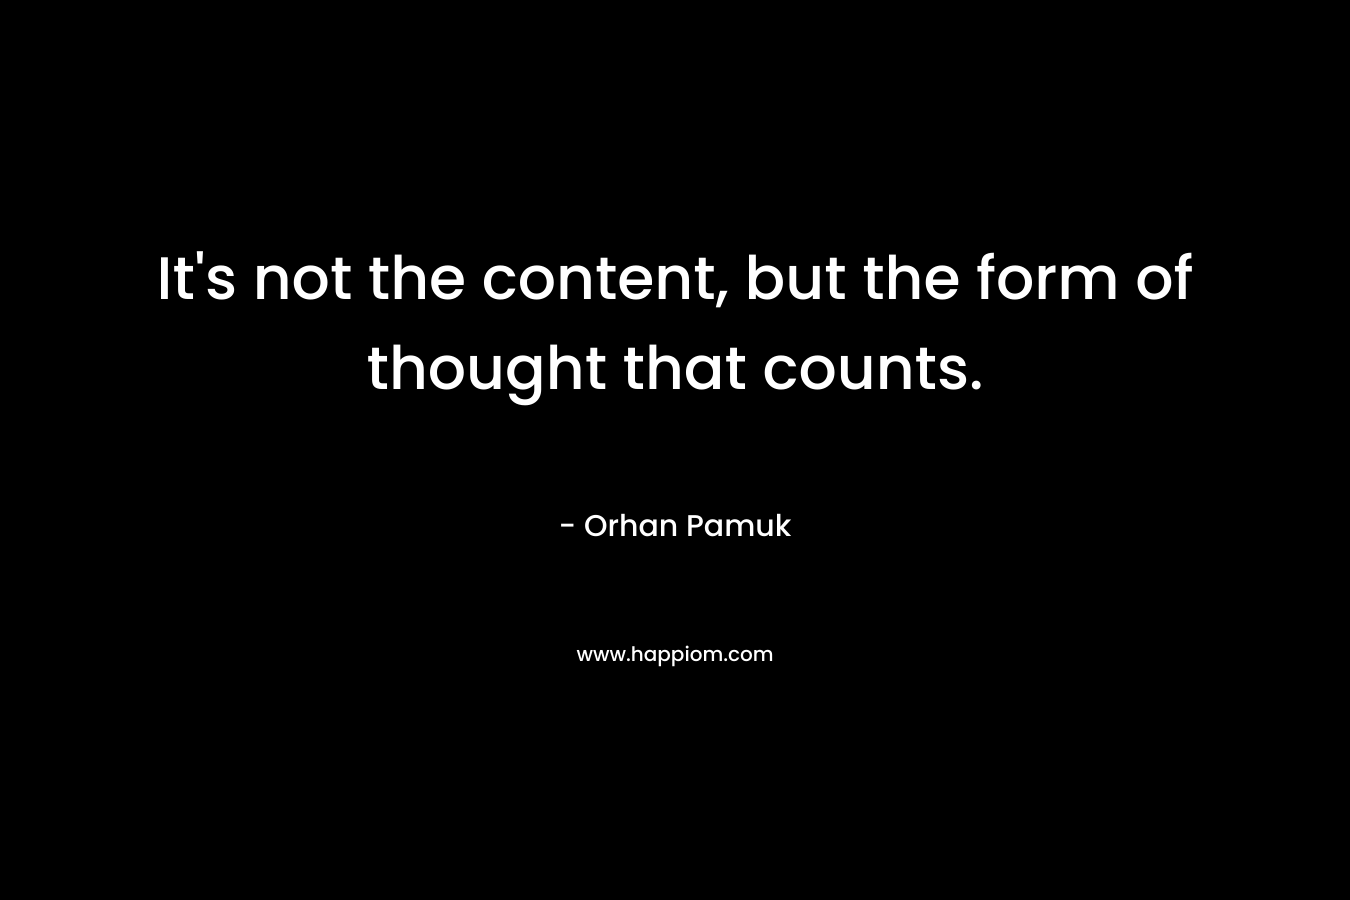 It’s not the content, but the form of thought that counts. – Orhan Pamuk